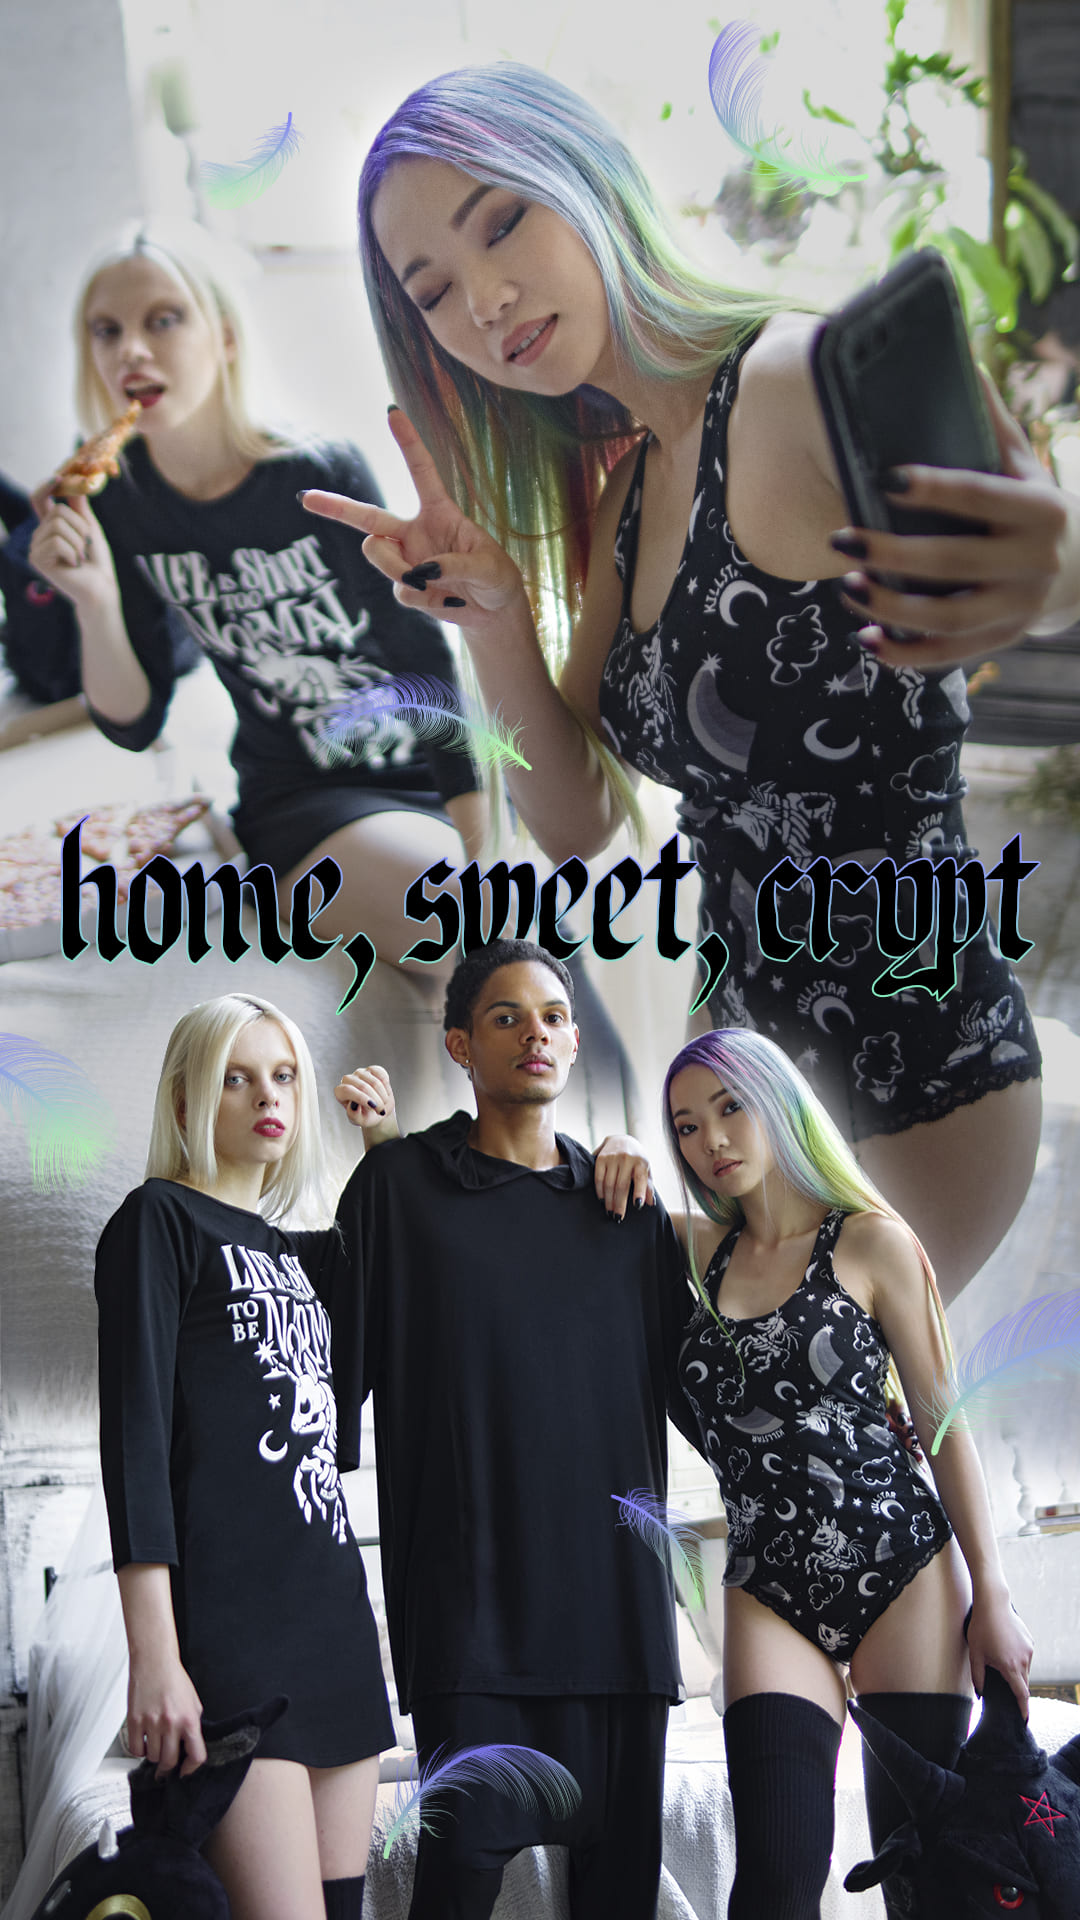 black homewear sets with printed pattern and slogan from killstar